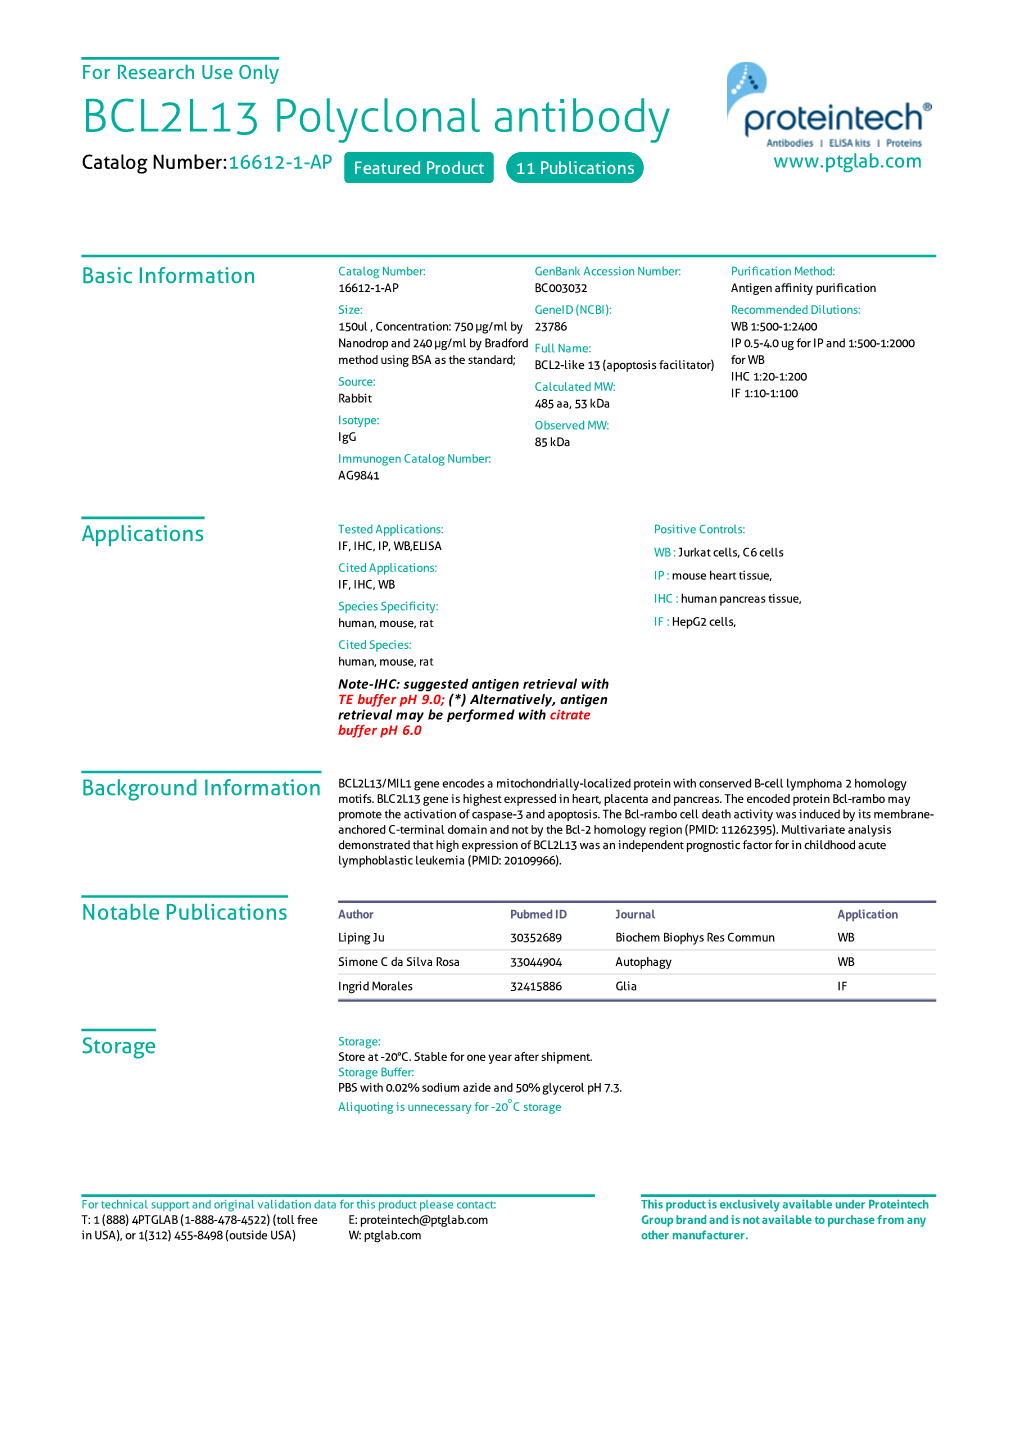 BCL2L13 Polyclonal Antibody Catalog Number:16612-1-AP Featured Product 11 Publications